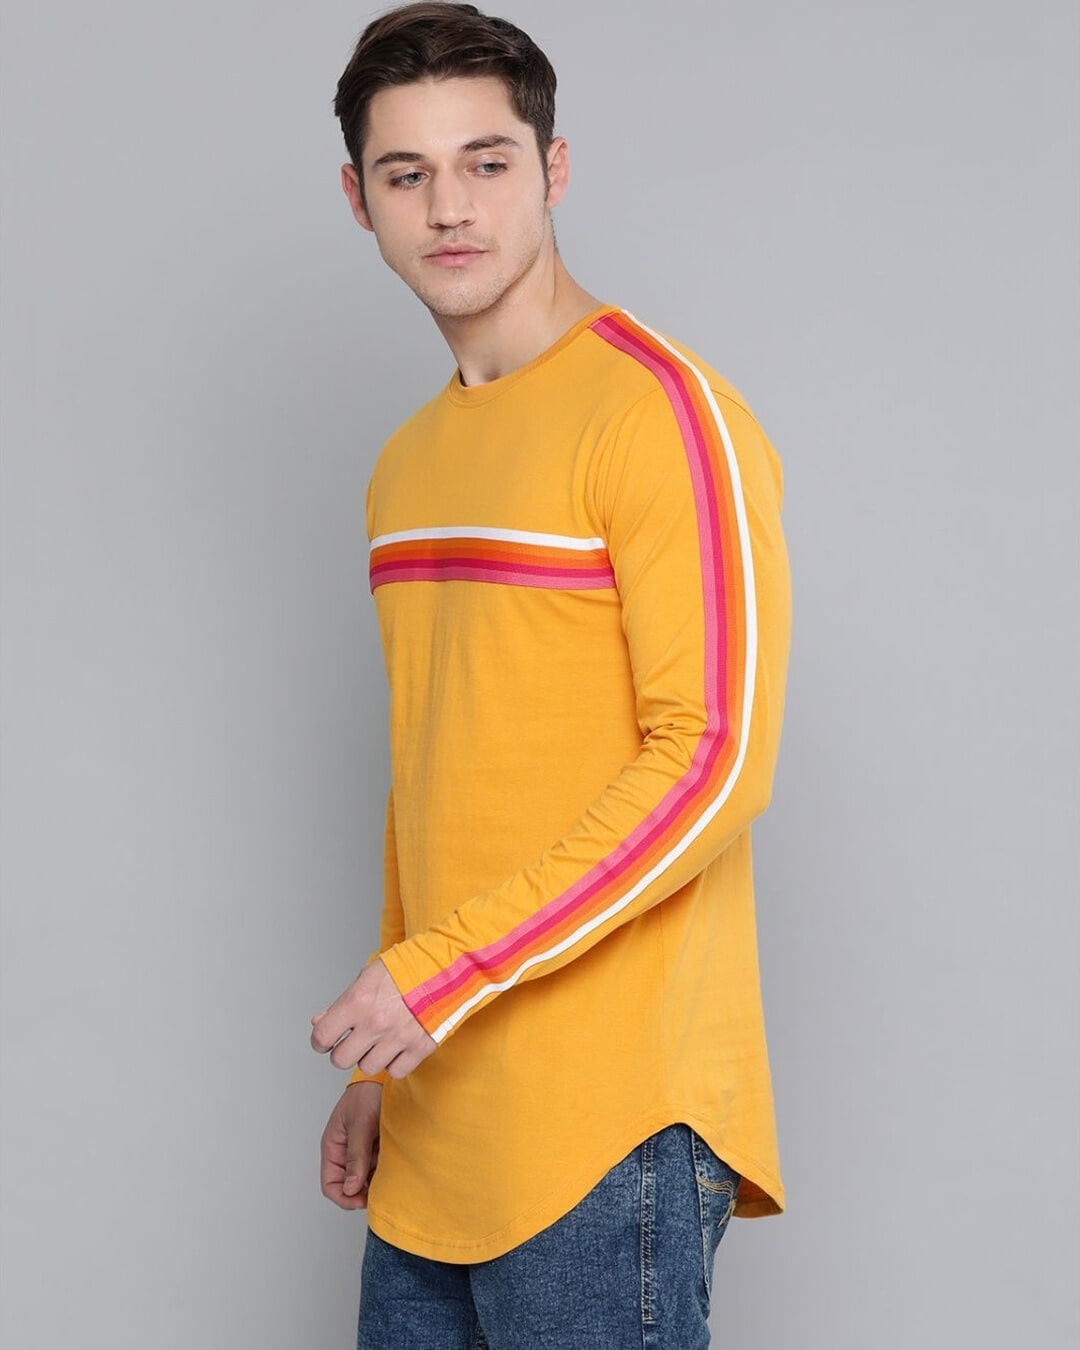 Shop Yellow Solid T Shirt